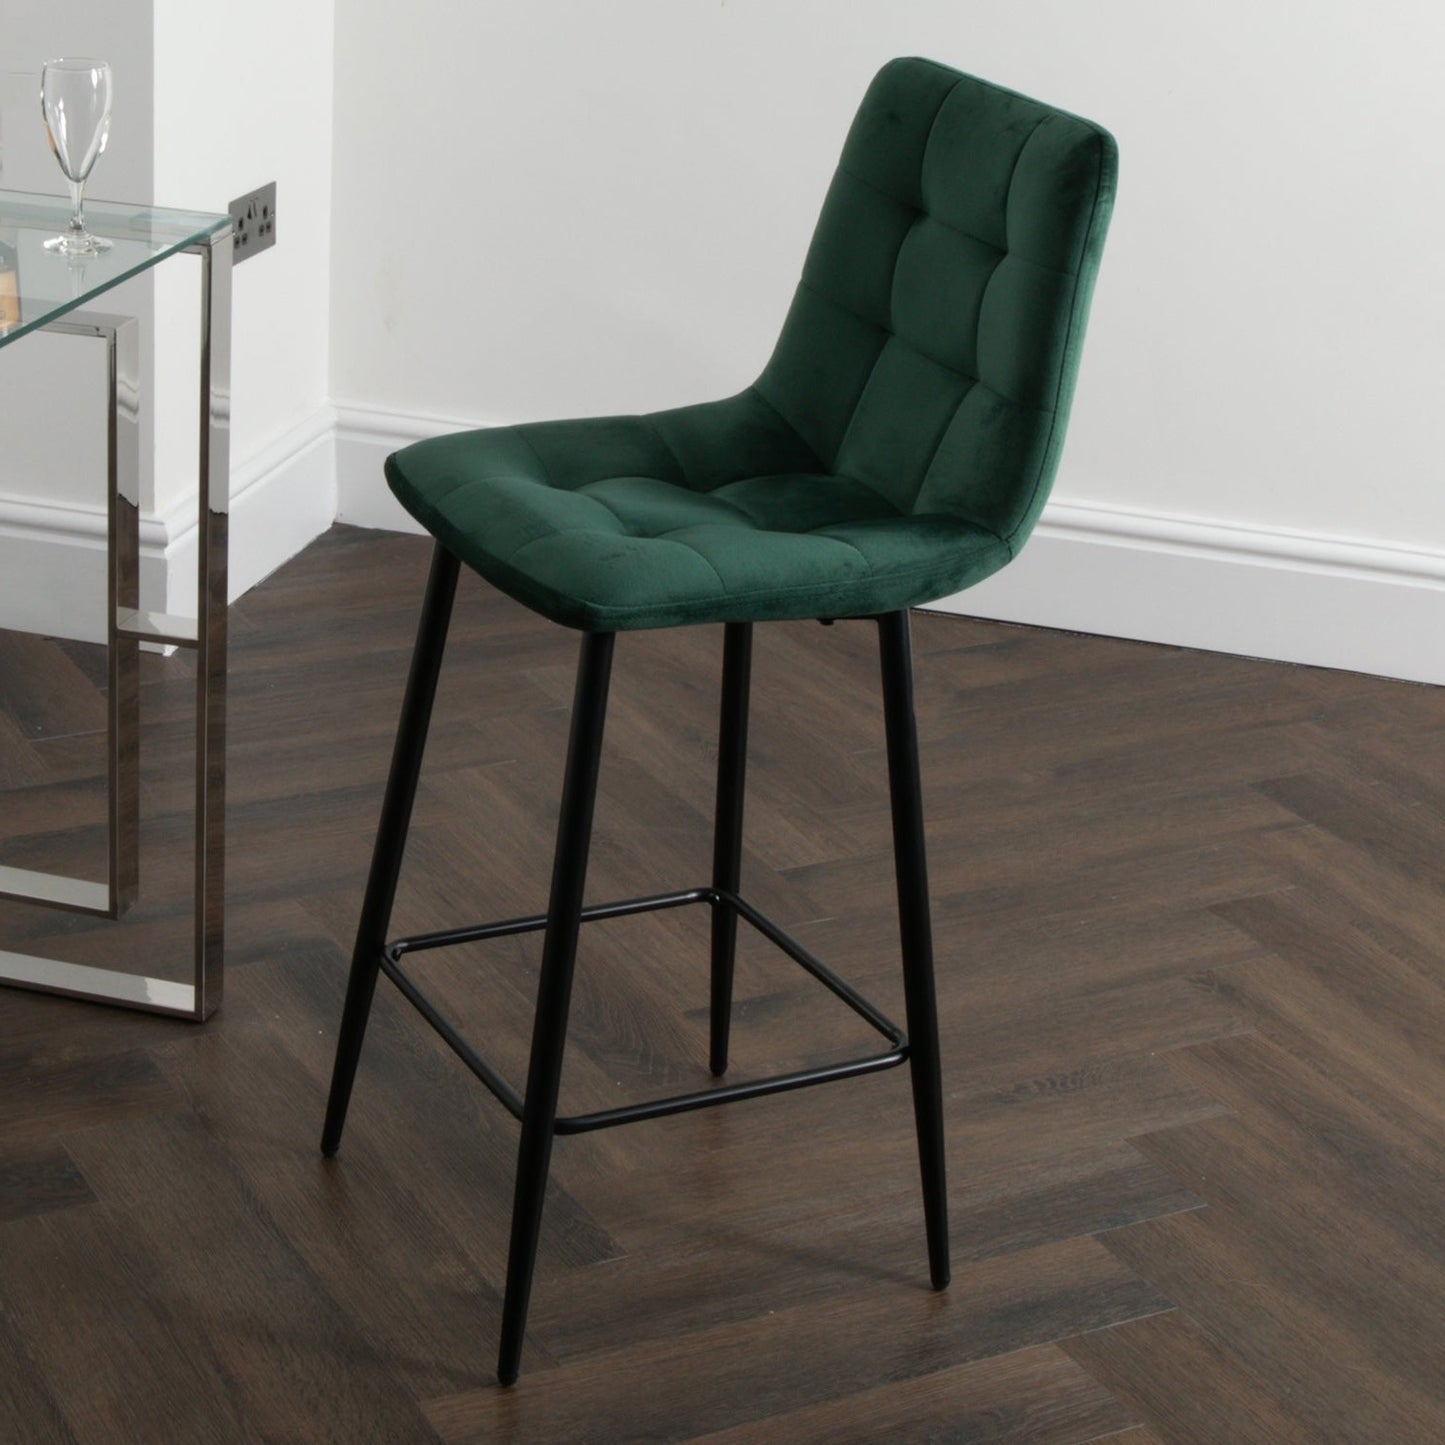 2 Set squared green kitchen bar stool by Native